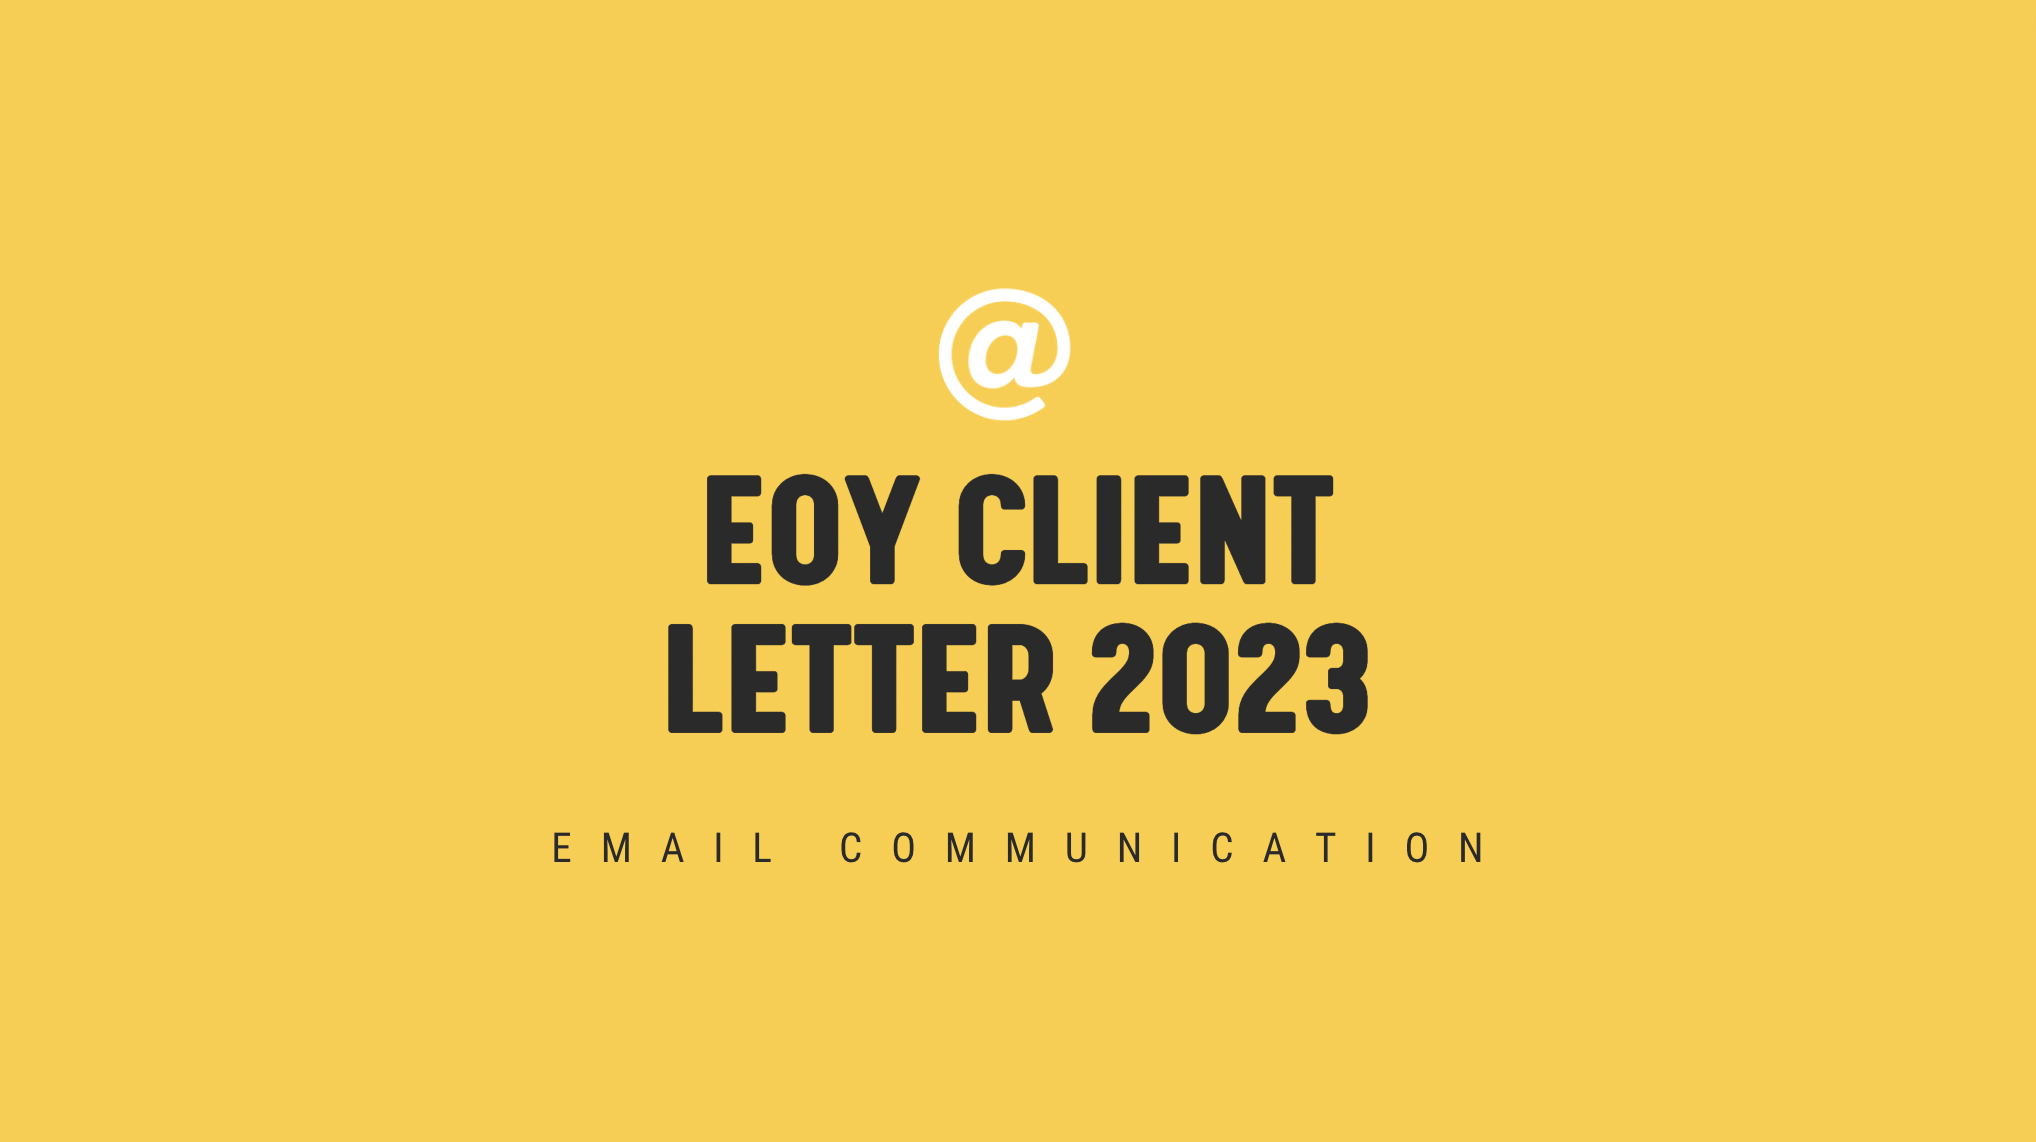 [NEW] EOY Client Letter 2023 - Timely Email